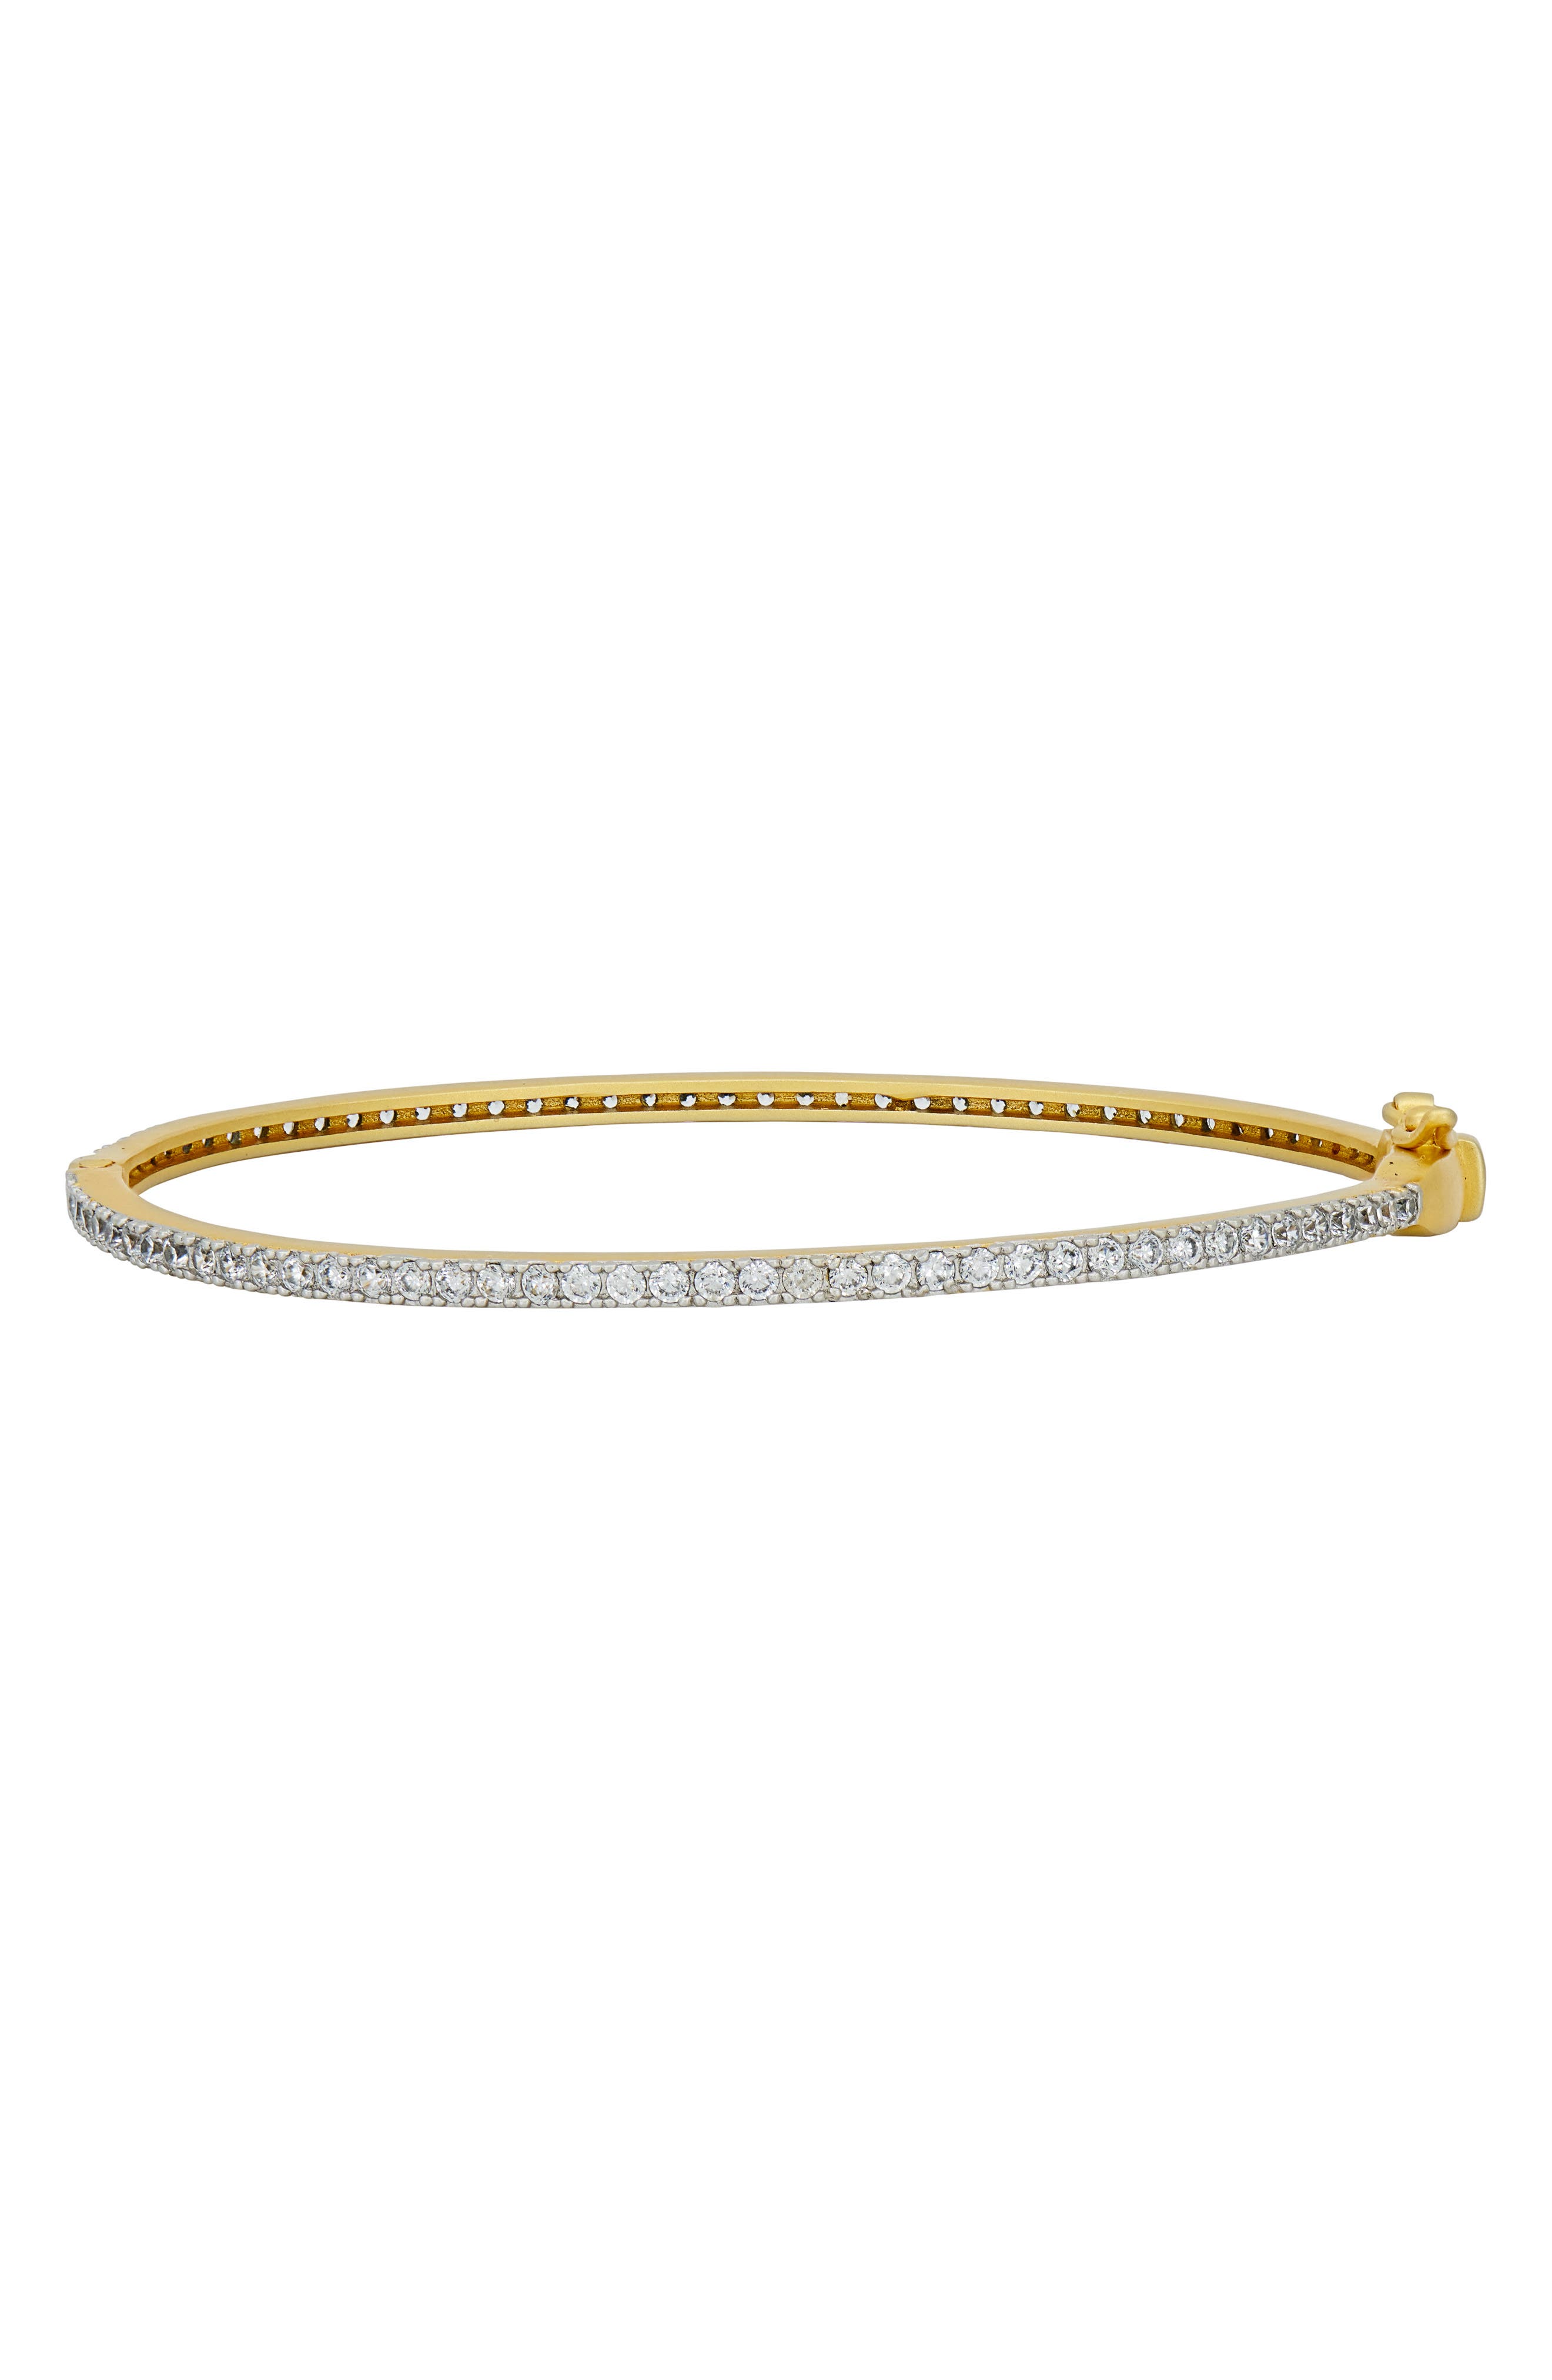 FREIDA ROTHMAN FRIEDA ROTHMAN Armor of Pave Bangle Bracelet in Gold And Silver at Nordstrom -  AHPYZB04-H